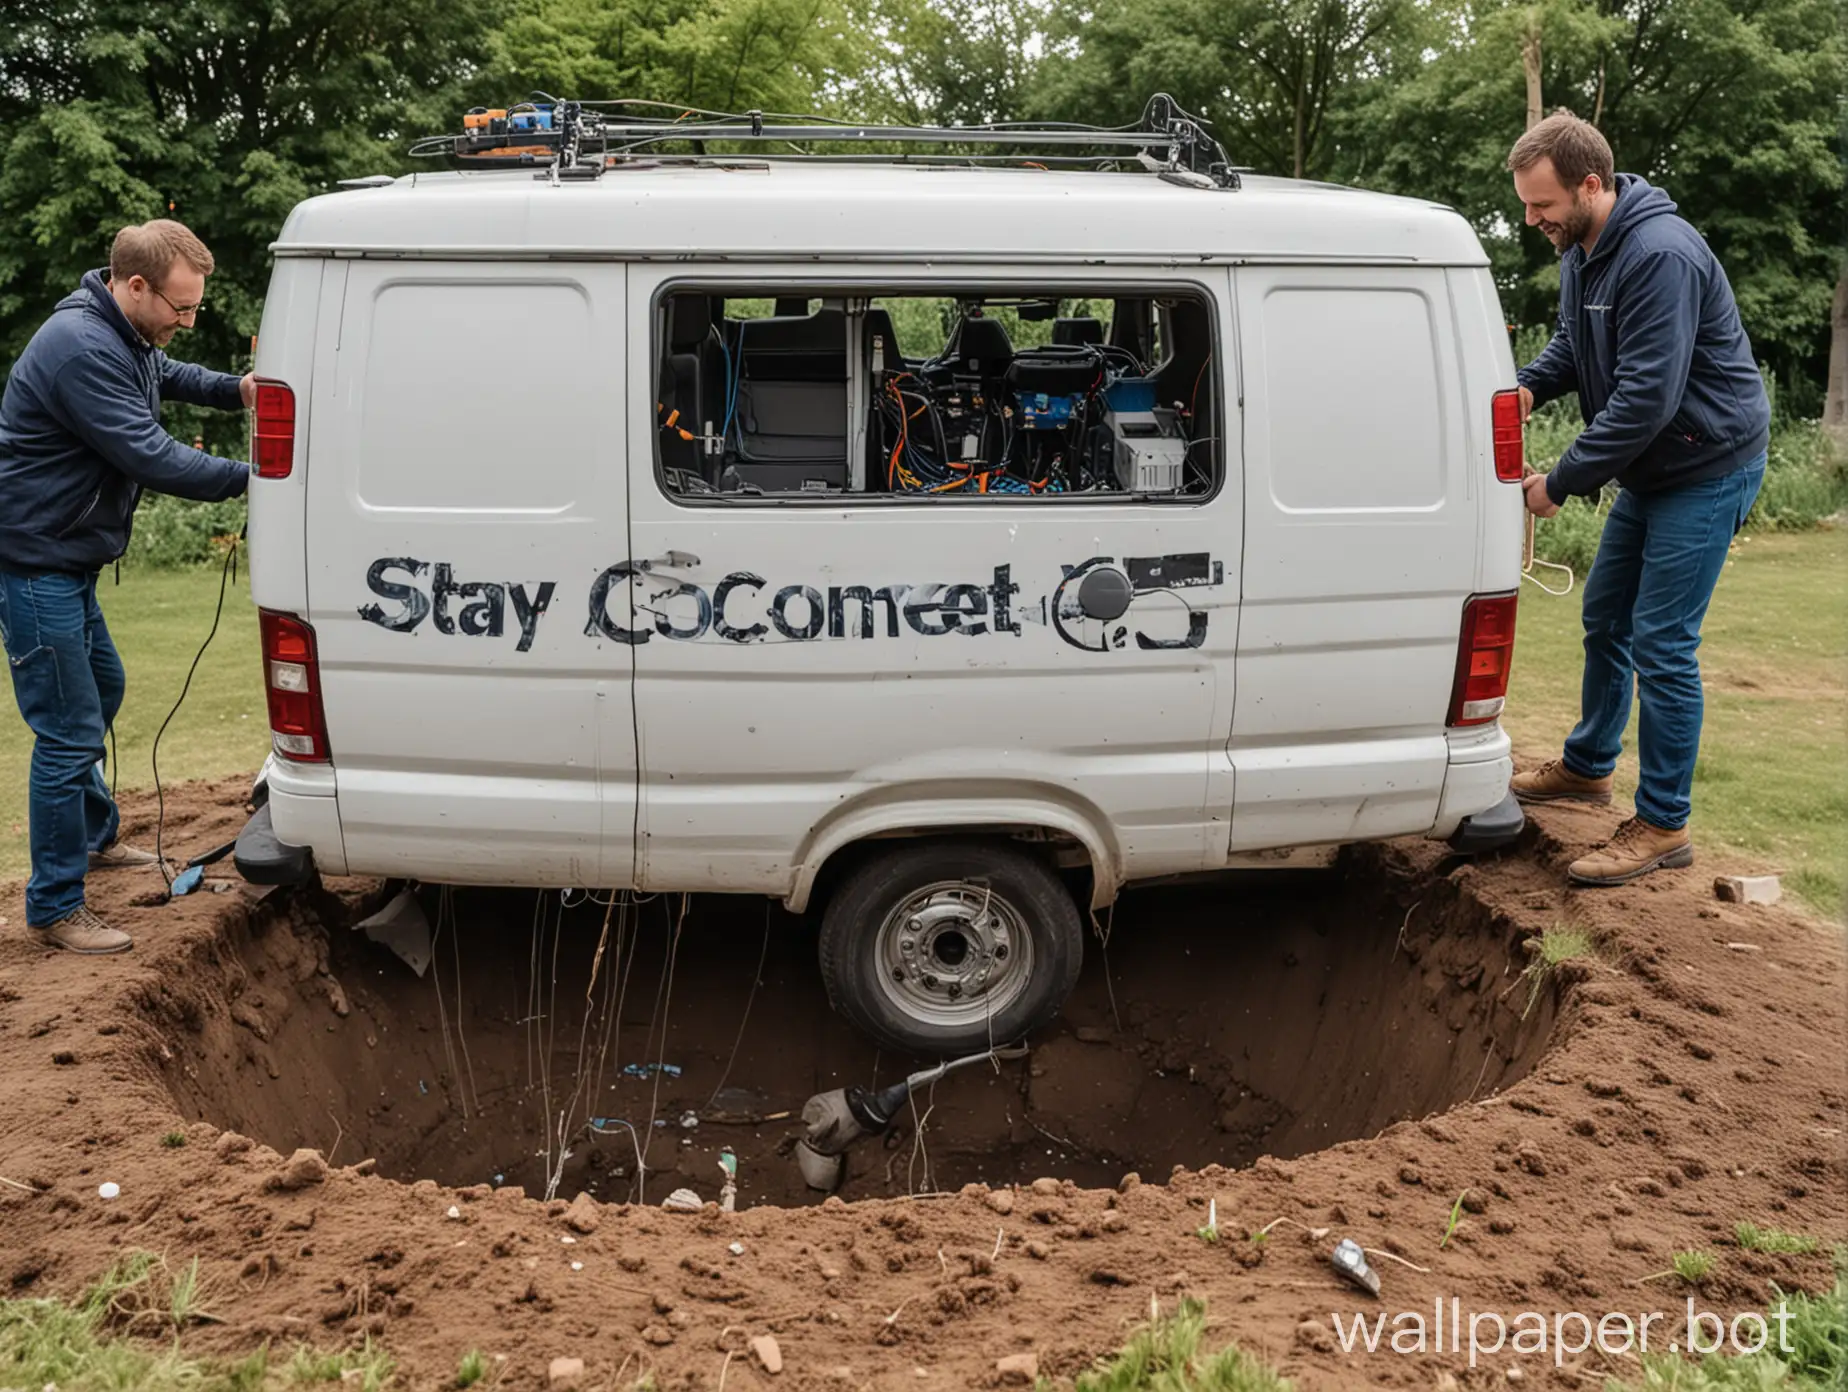 a van with "stay connected" on it, two men are digging a hole in the ground and putting fiber optics in it